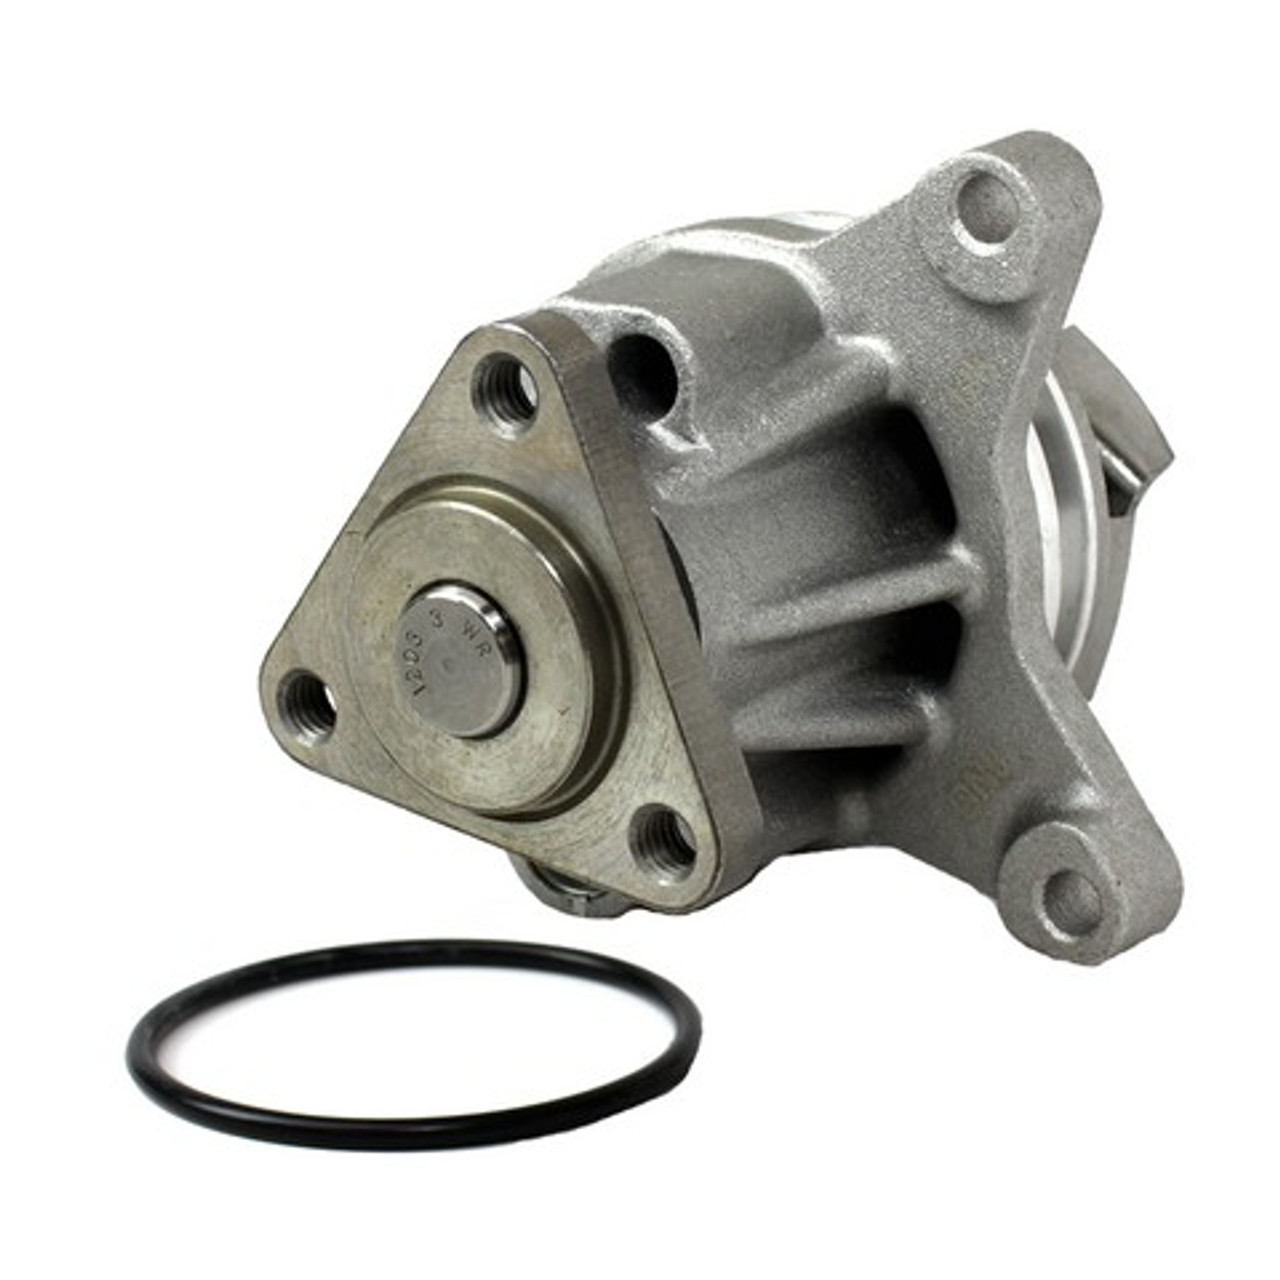 Water Pump 2.0L 2014 Ford Fusion - WP4032.51